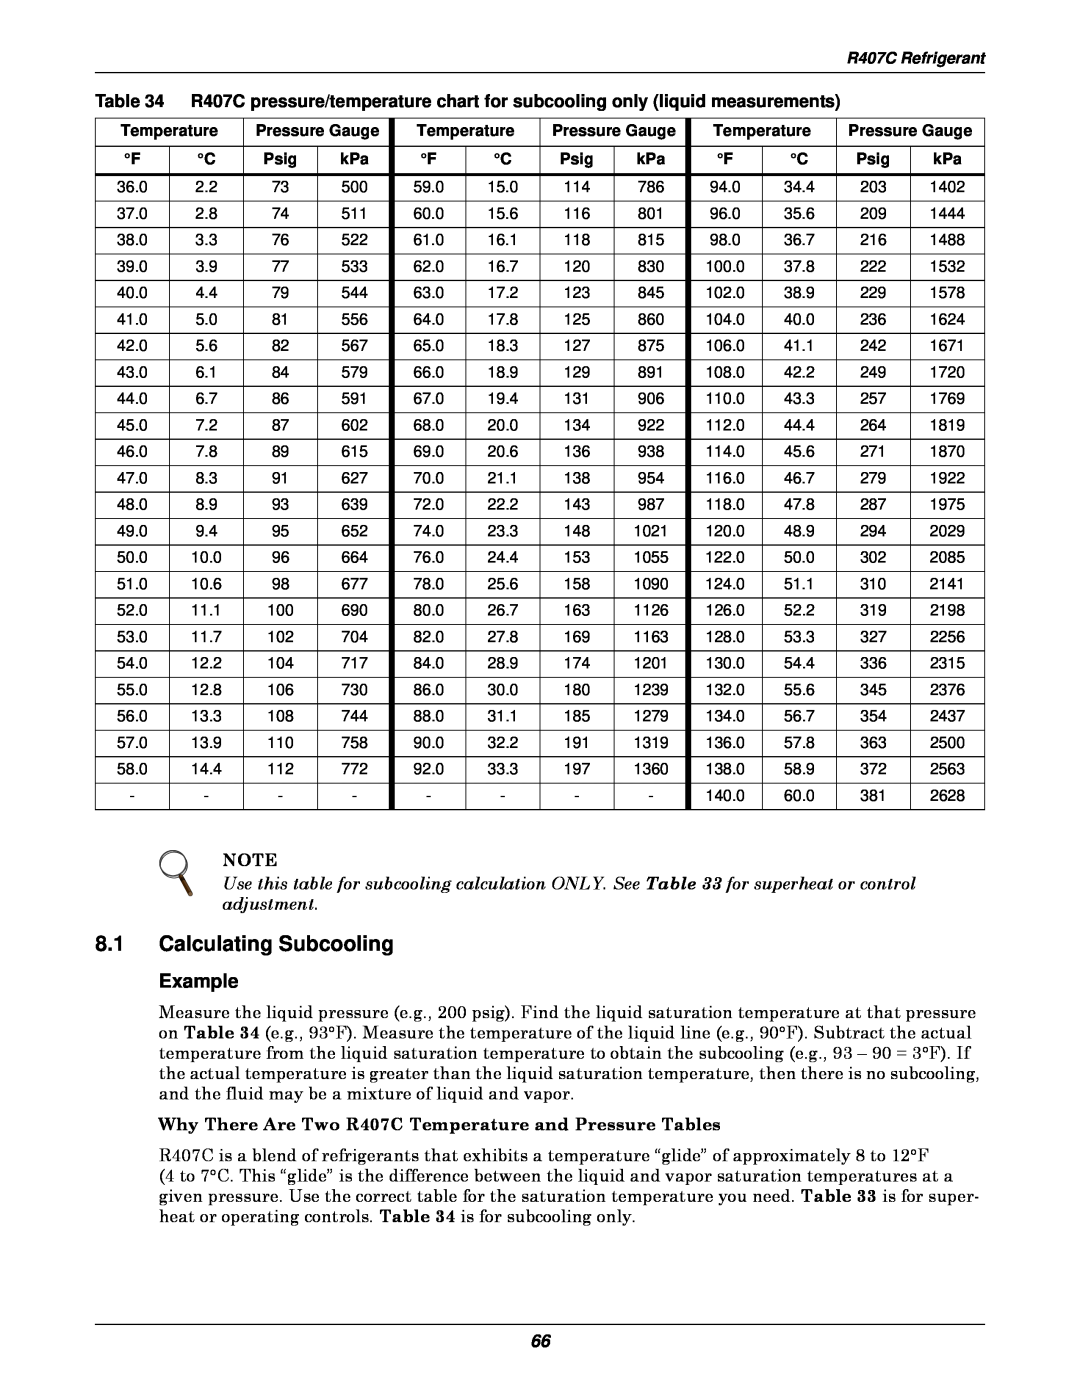 Liebert 3000 installation manual 8.1Calculating Subcooling, Example 